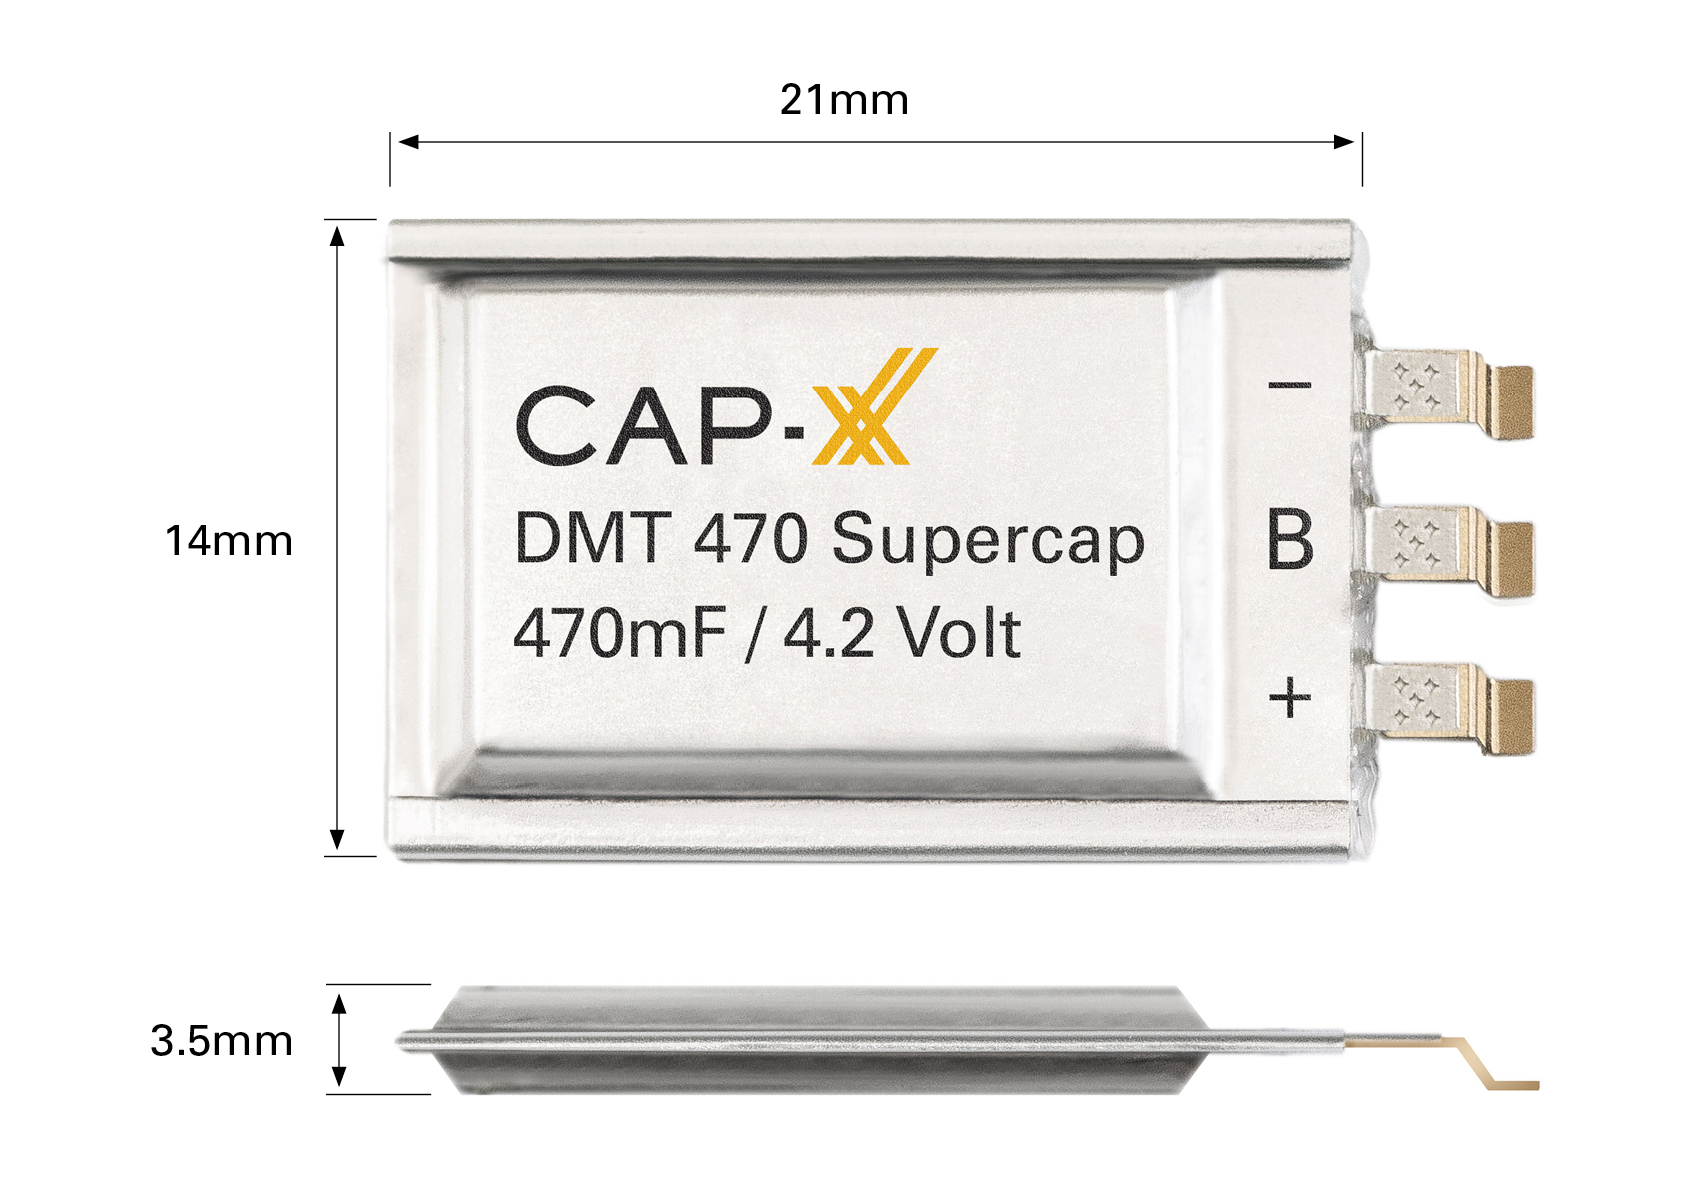 Thin prismatic CAP-XX supercap fits easily inside VAIMOO's small e-bike IoT device and delivers high burst power needed for e-bike sharing system's Bluetooth and GPS/GPRS data communications.